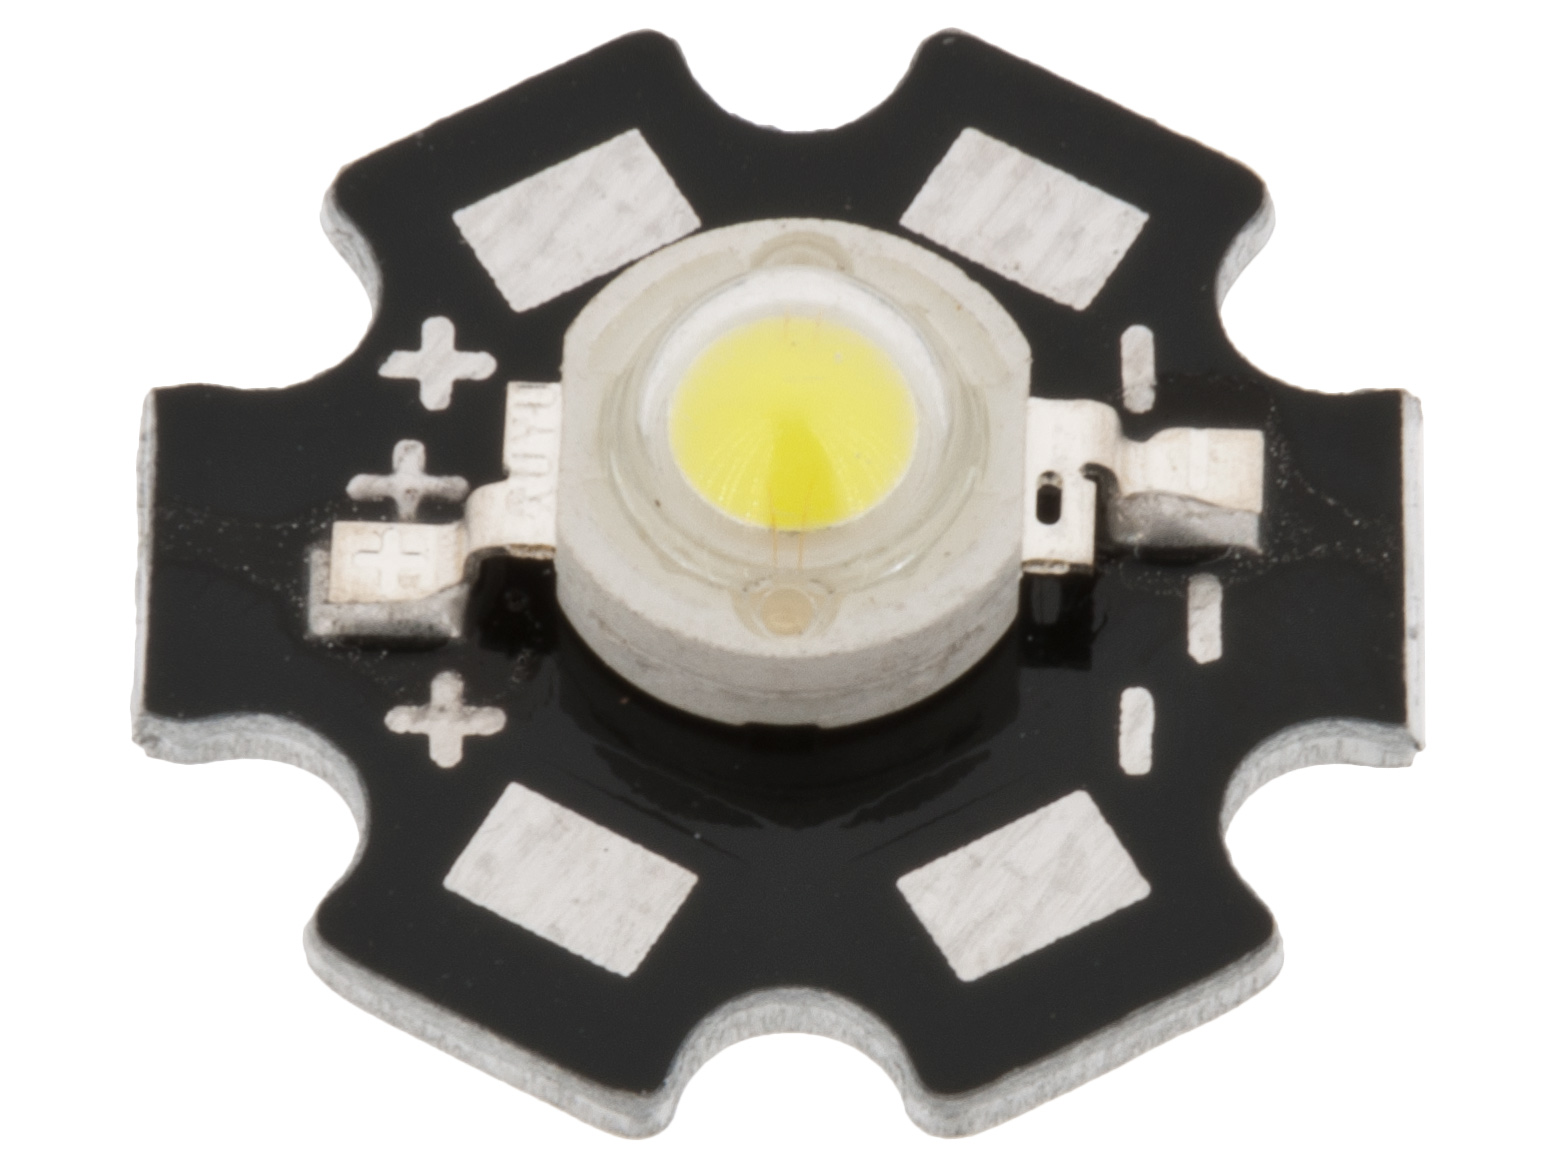 LED 3W cool white 6000K with PCB @ electrokit